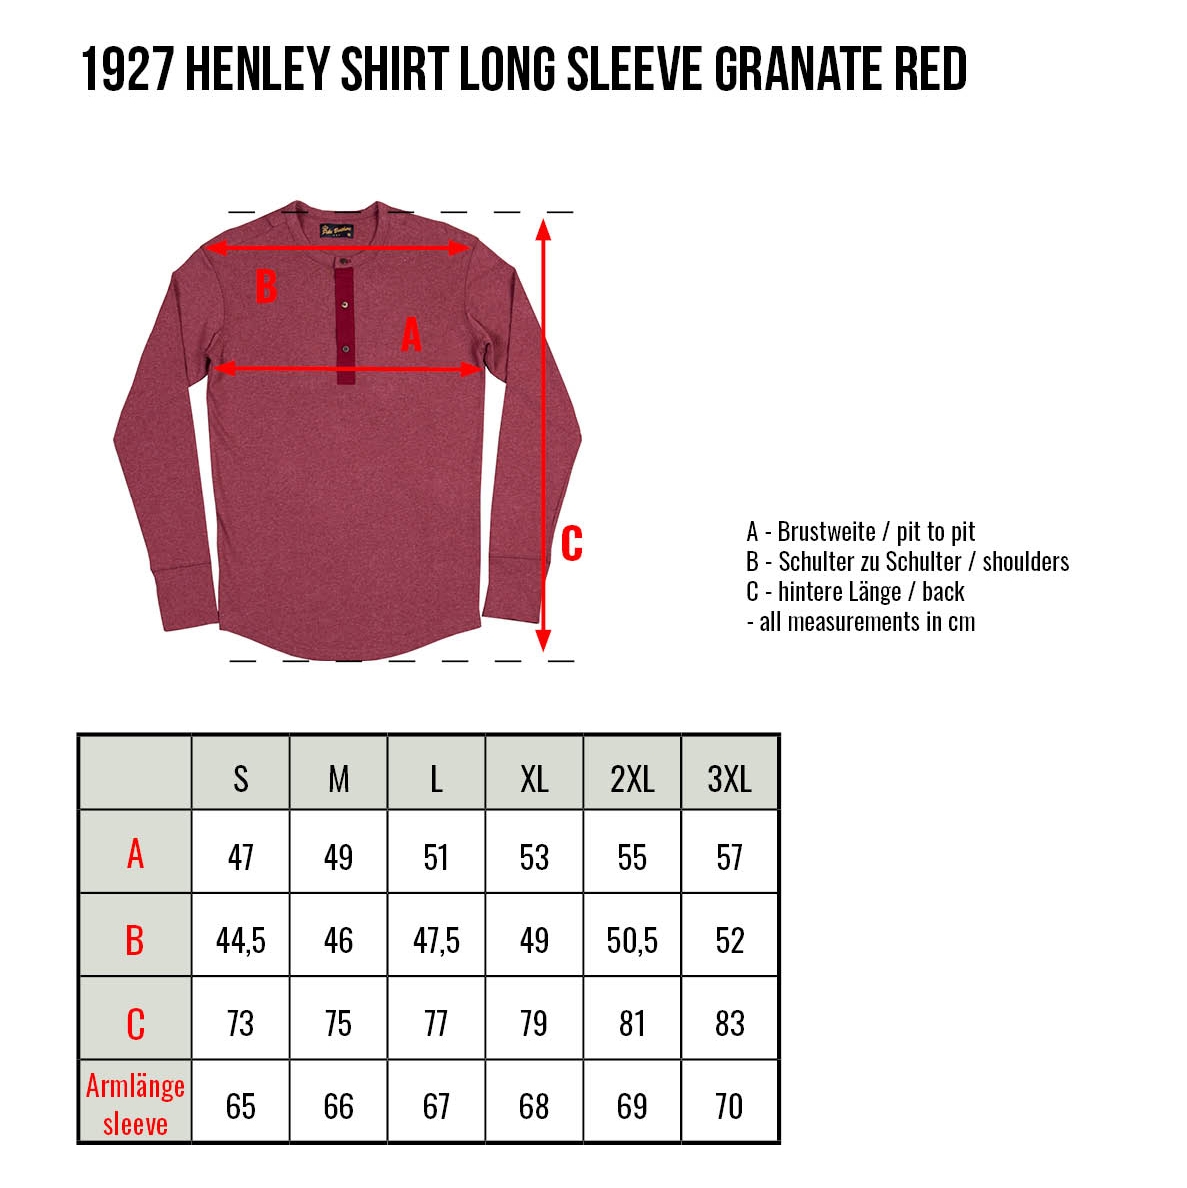 Pike Brothers 1927 Henley Shirt Long Sleeve - granate red